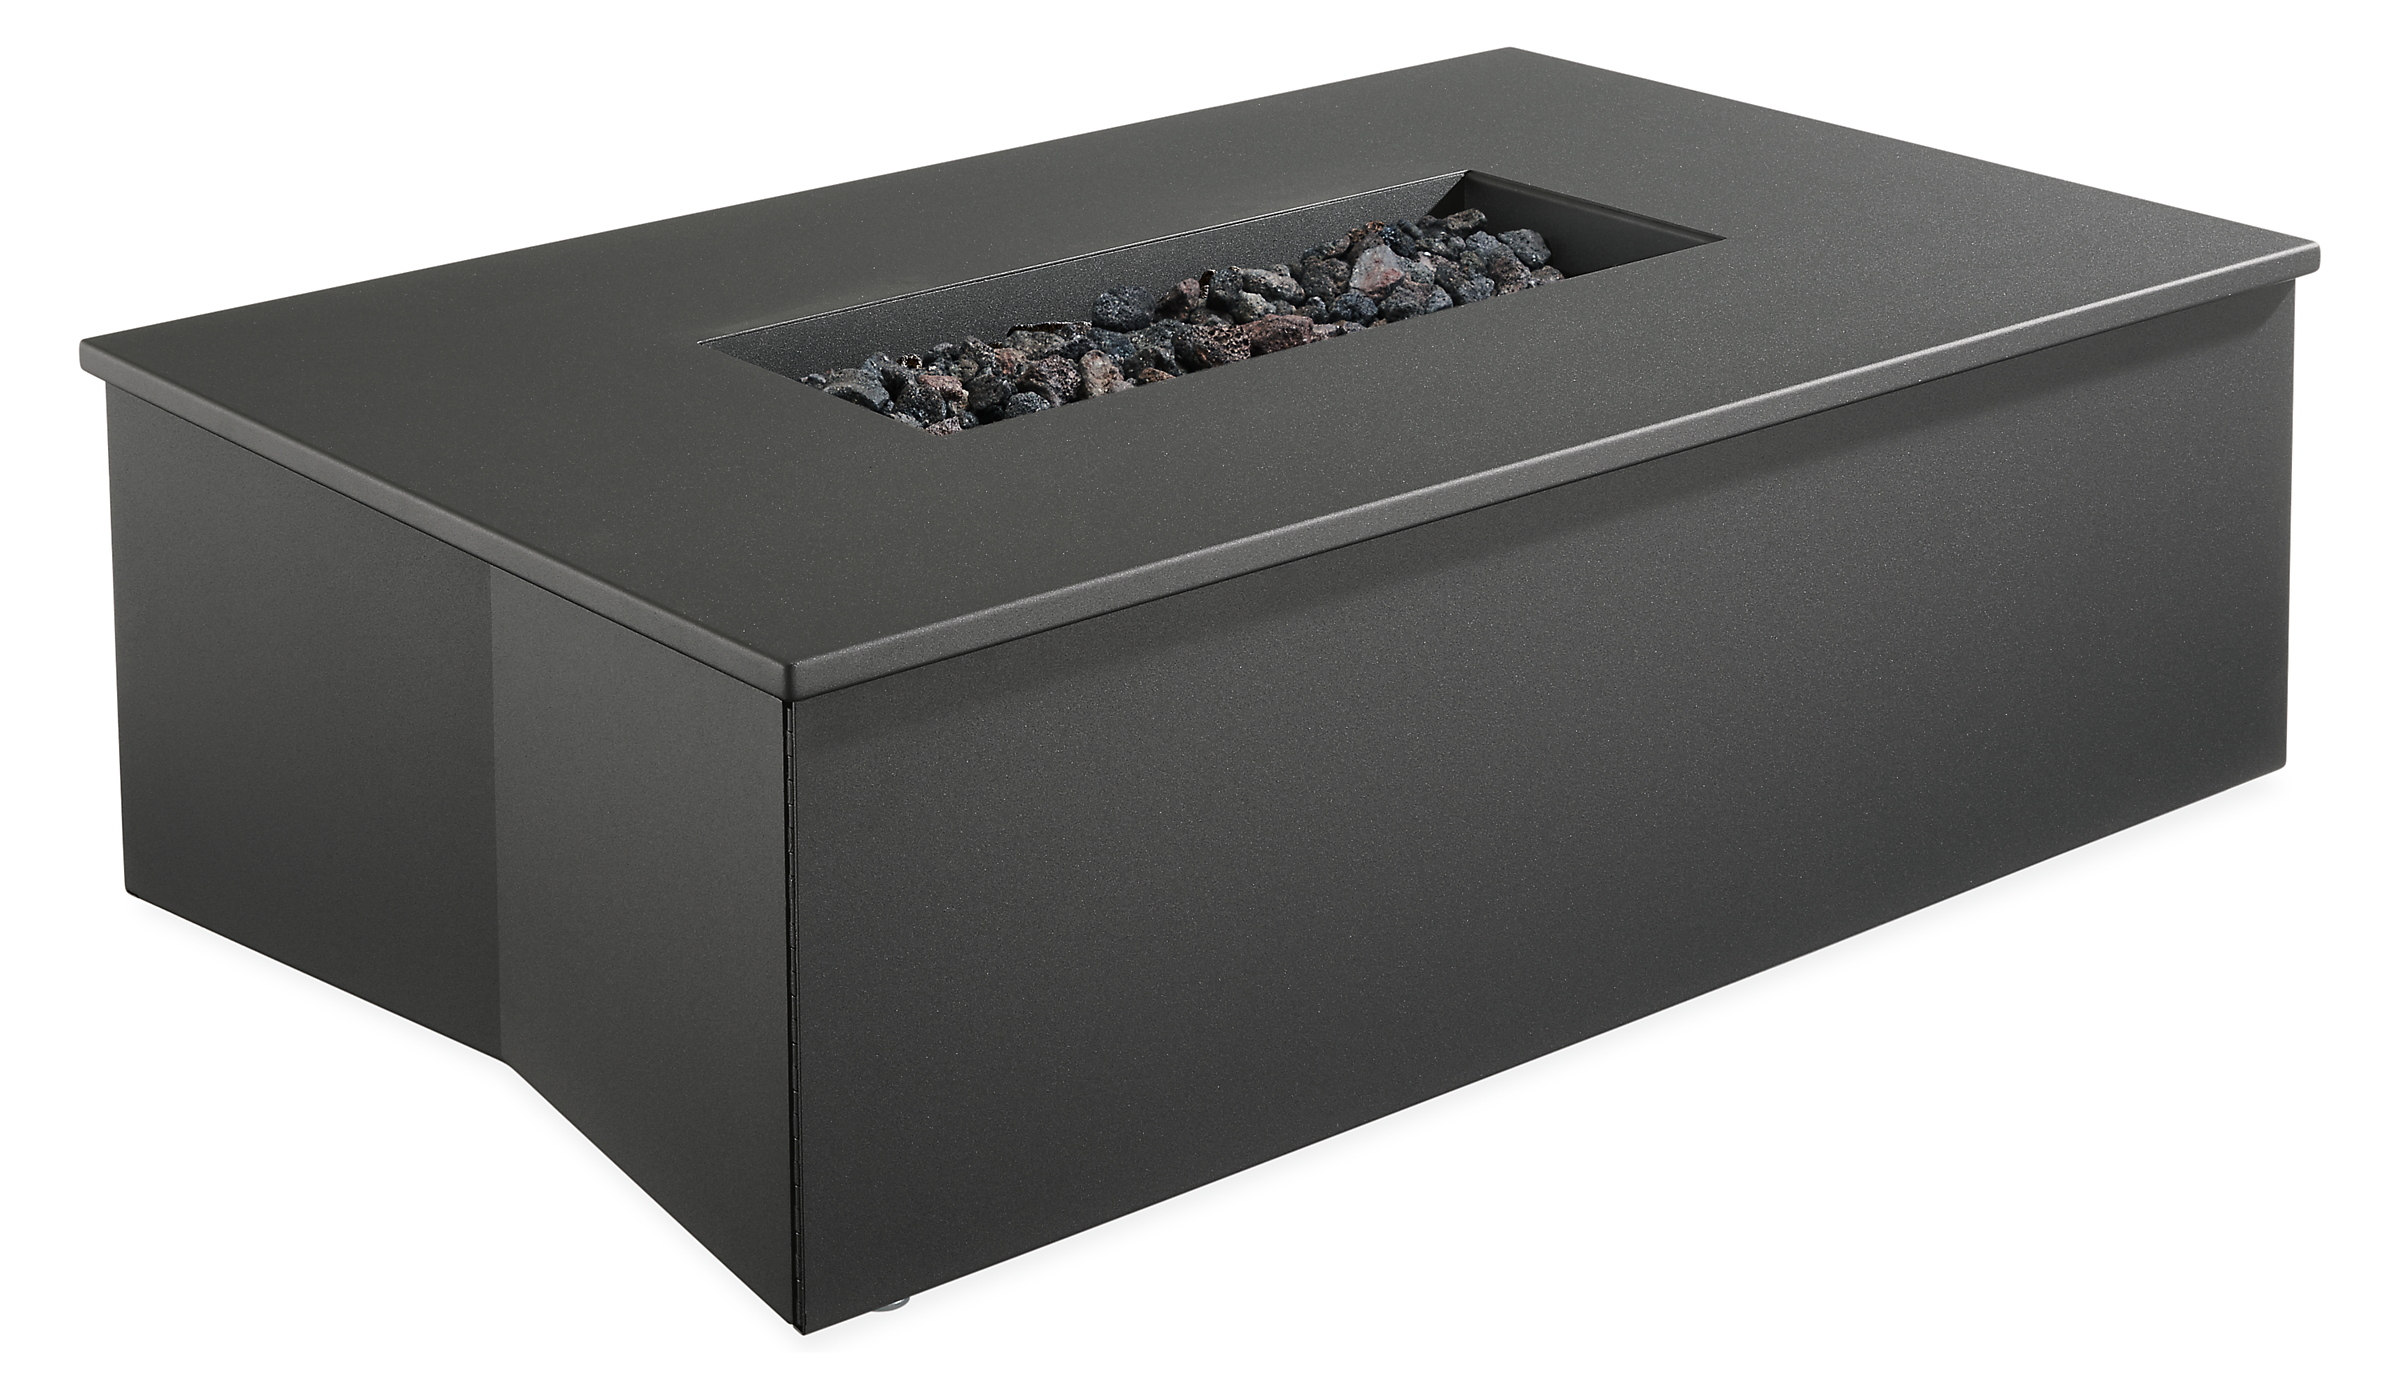 Adara 49w 31d 15h Outdoor Fire Table with Natural Gas Hook-Up in Graphite